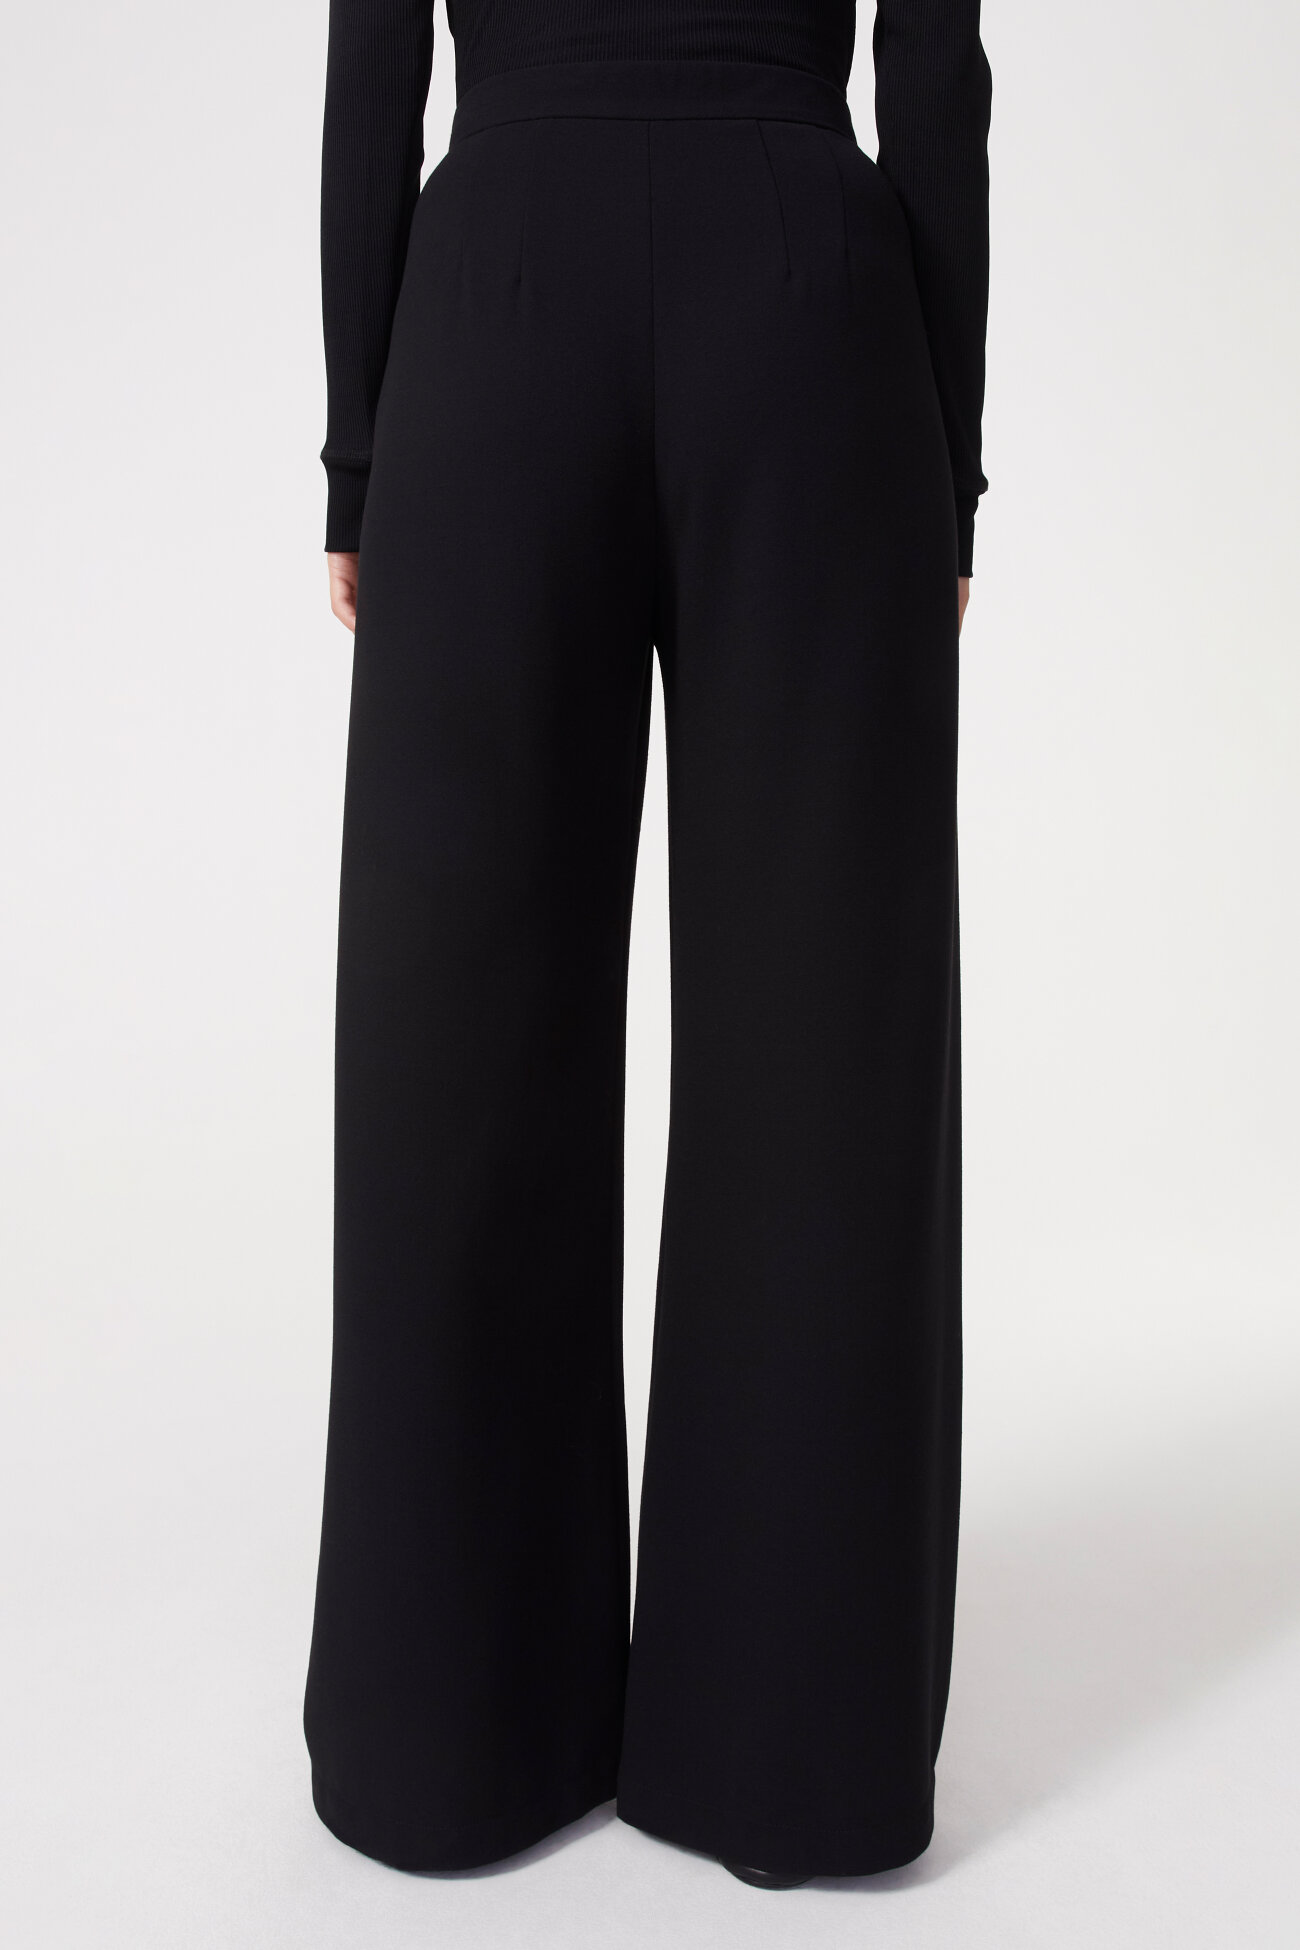 wide pants | Rodebjer.com